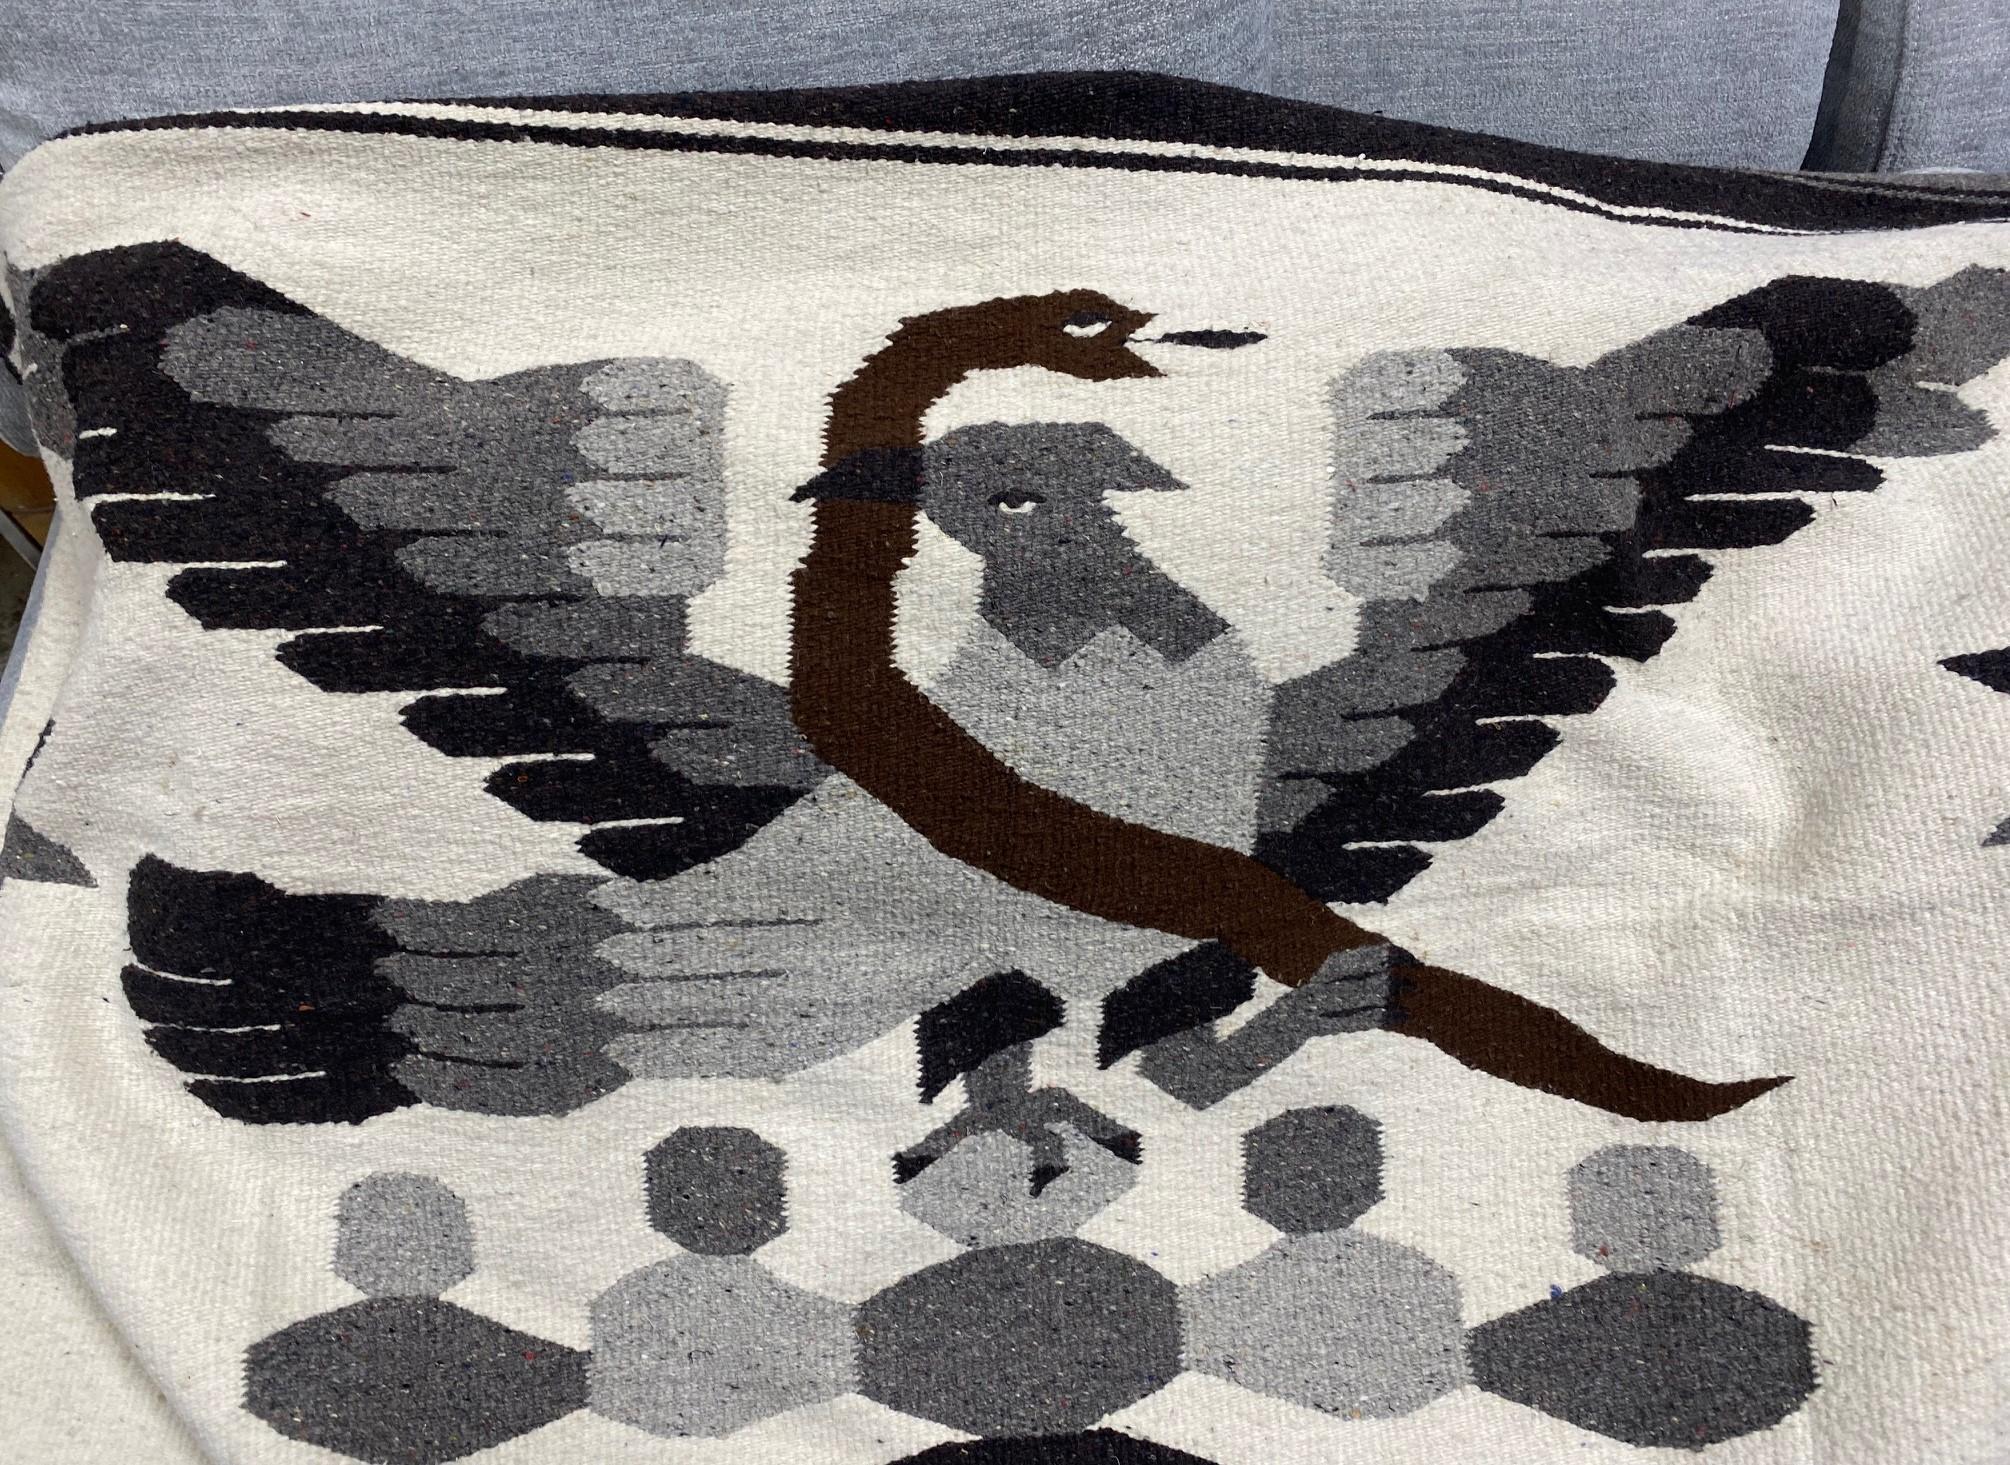 Large Wool North American Mexican Kilim Serape Blanket Rug with Eagle and Snake 5